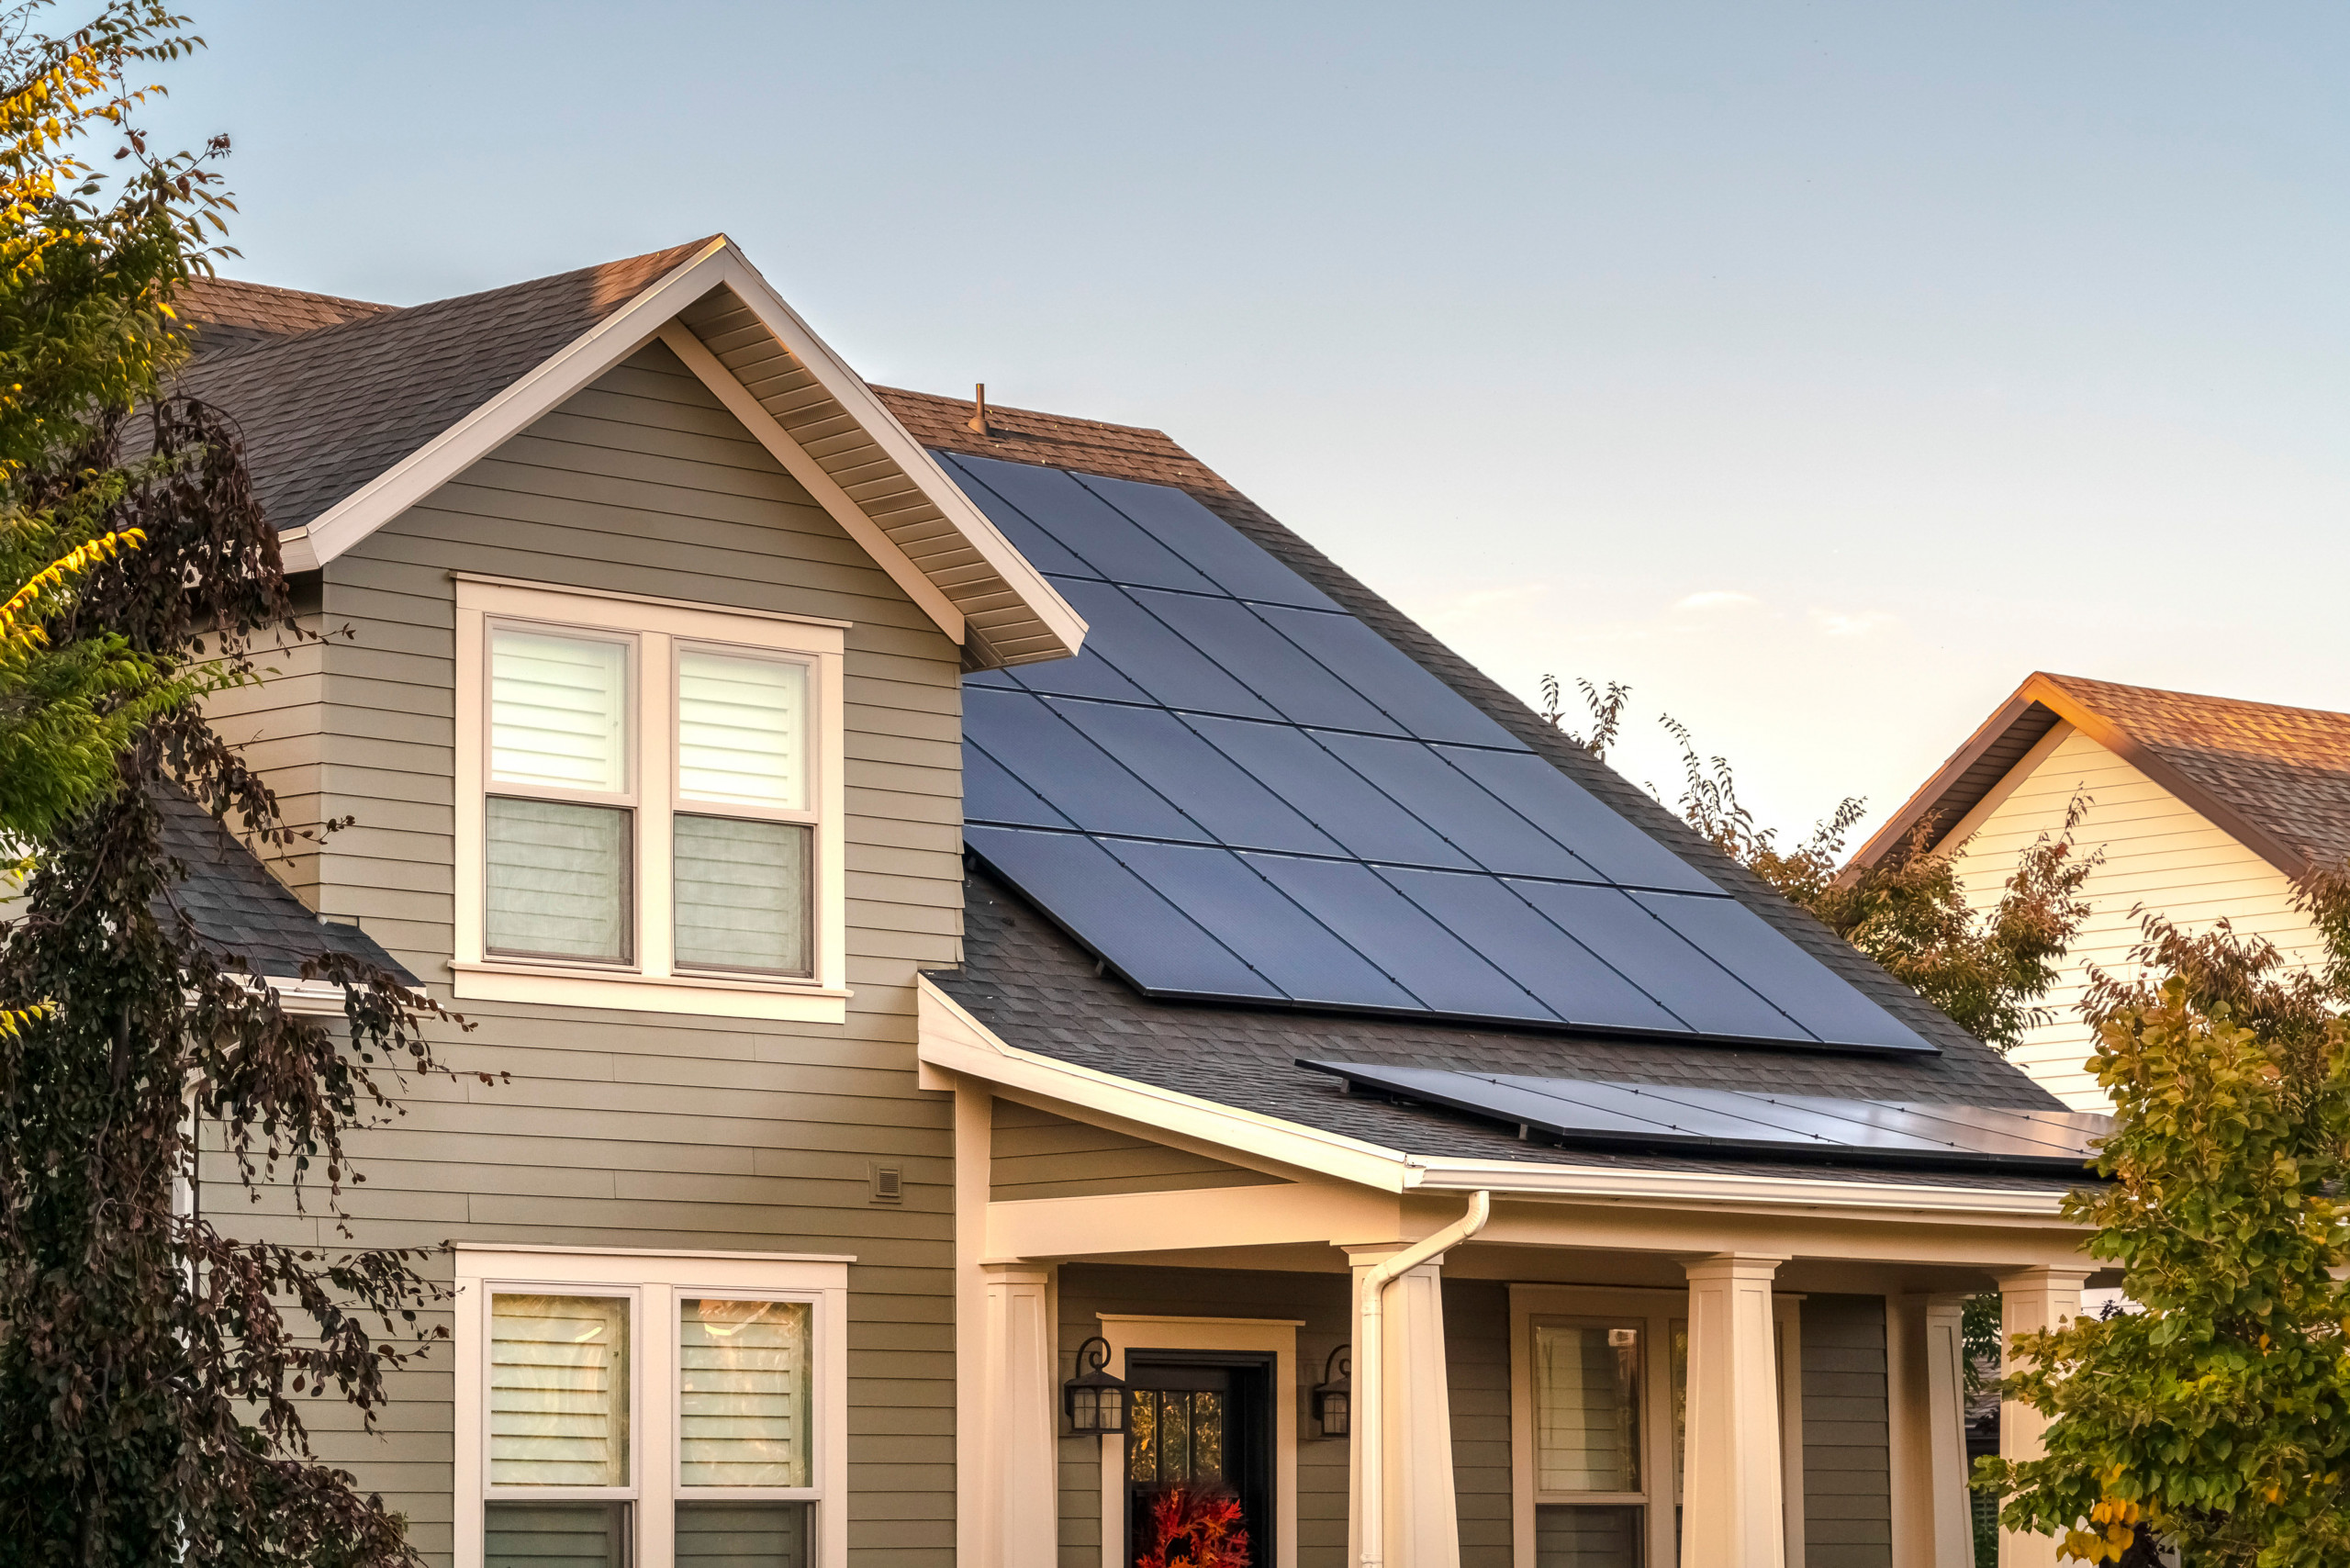 How to Use SolarAPP+ For Rooftop Solar Projects